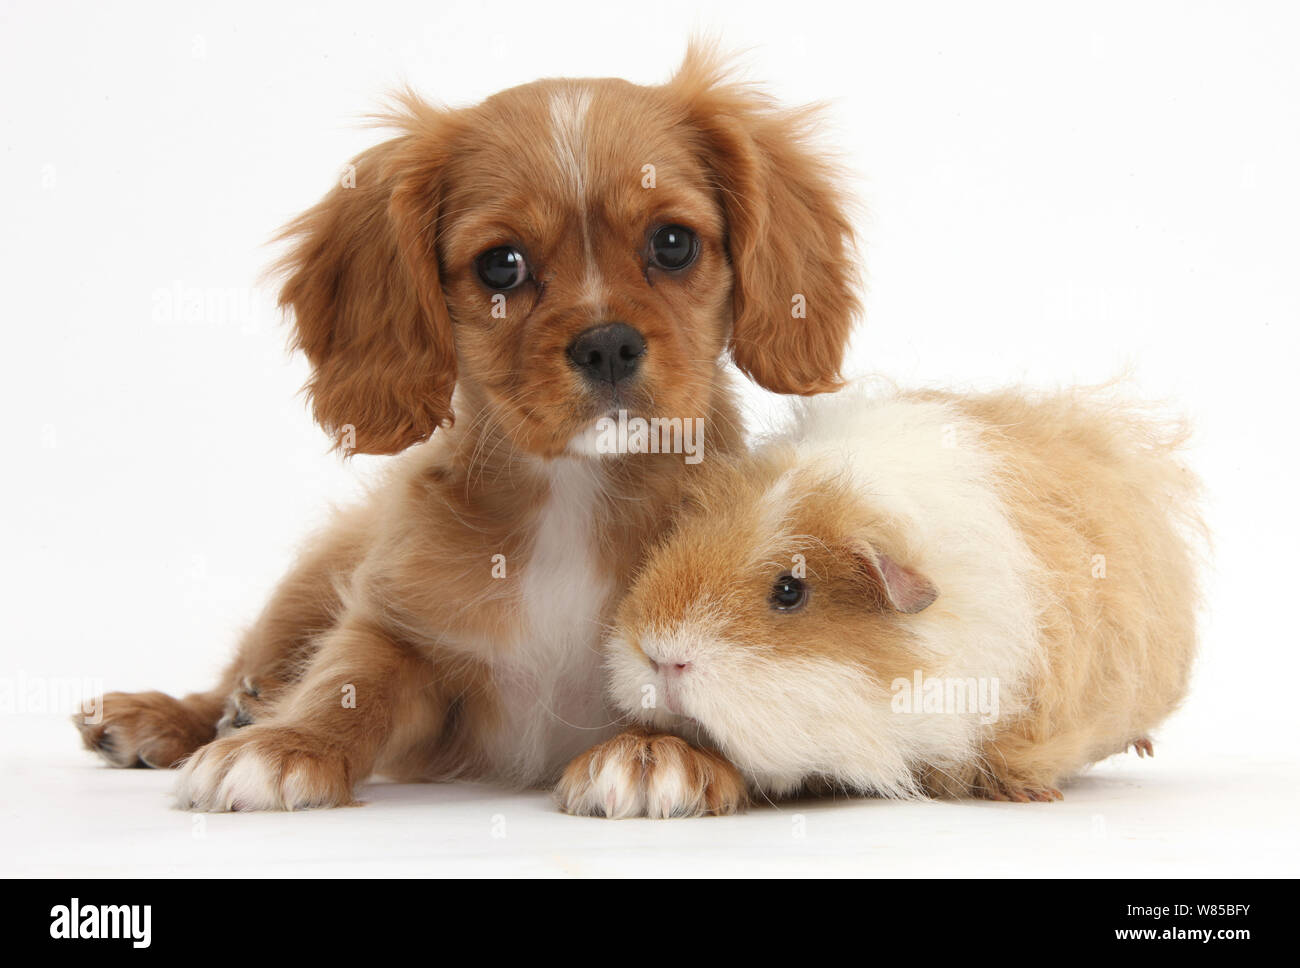 Blenheim Cavalier King Charles Spaniel pup, Star, with shaggy Guinea pig, against white background Stock Photo